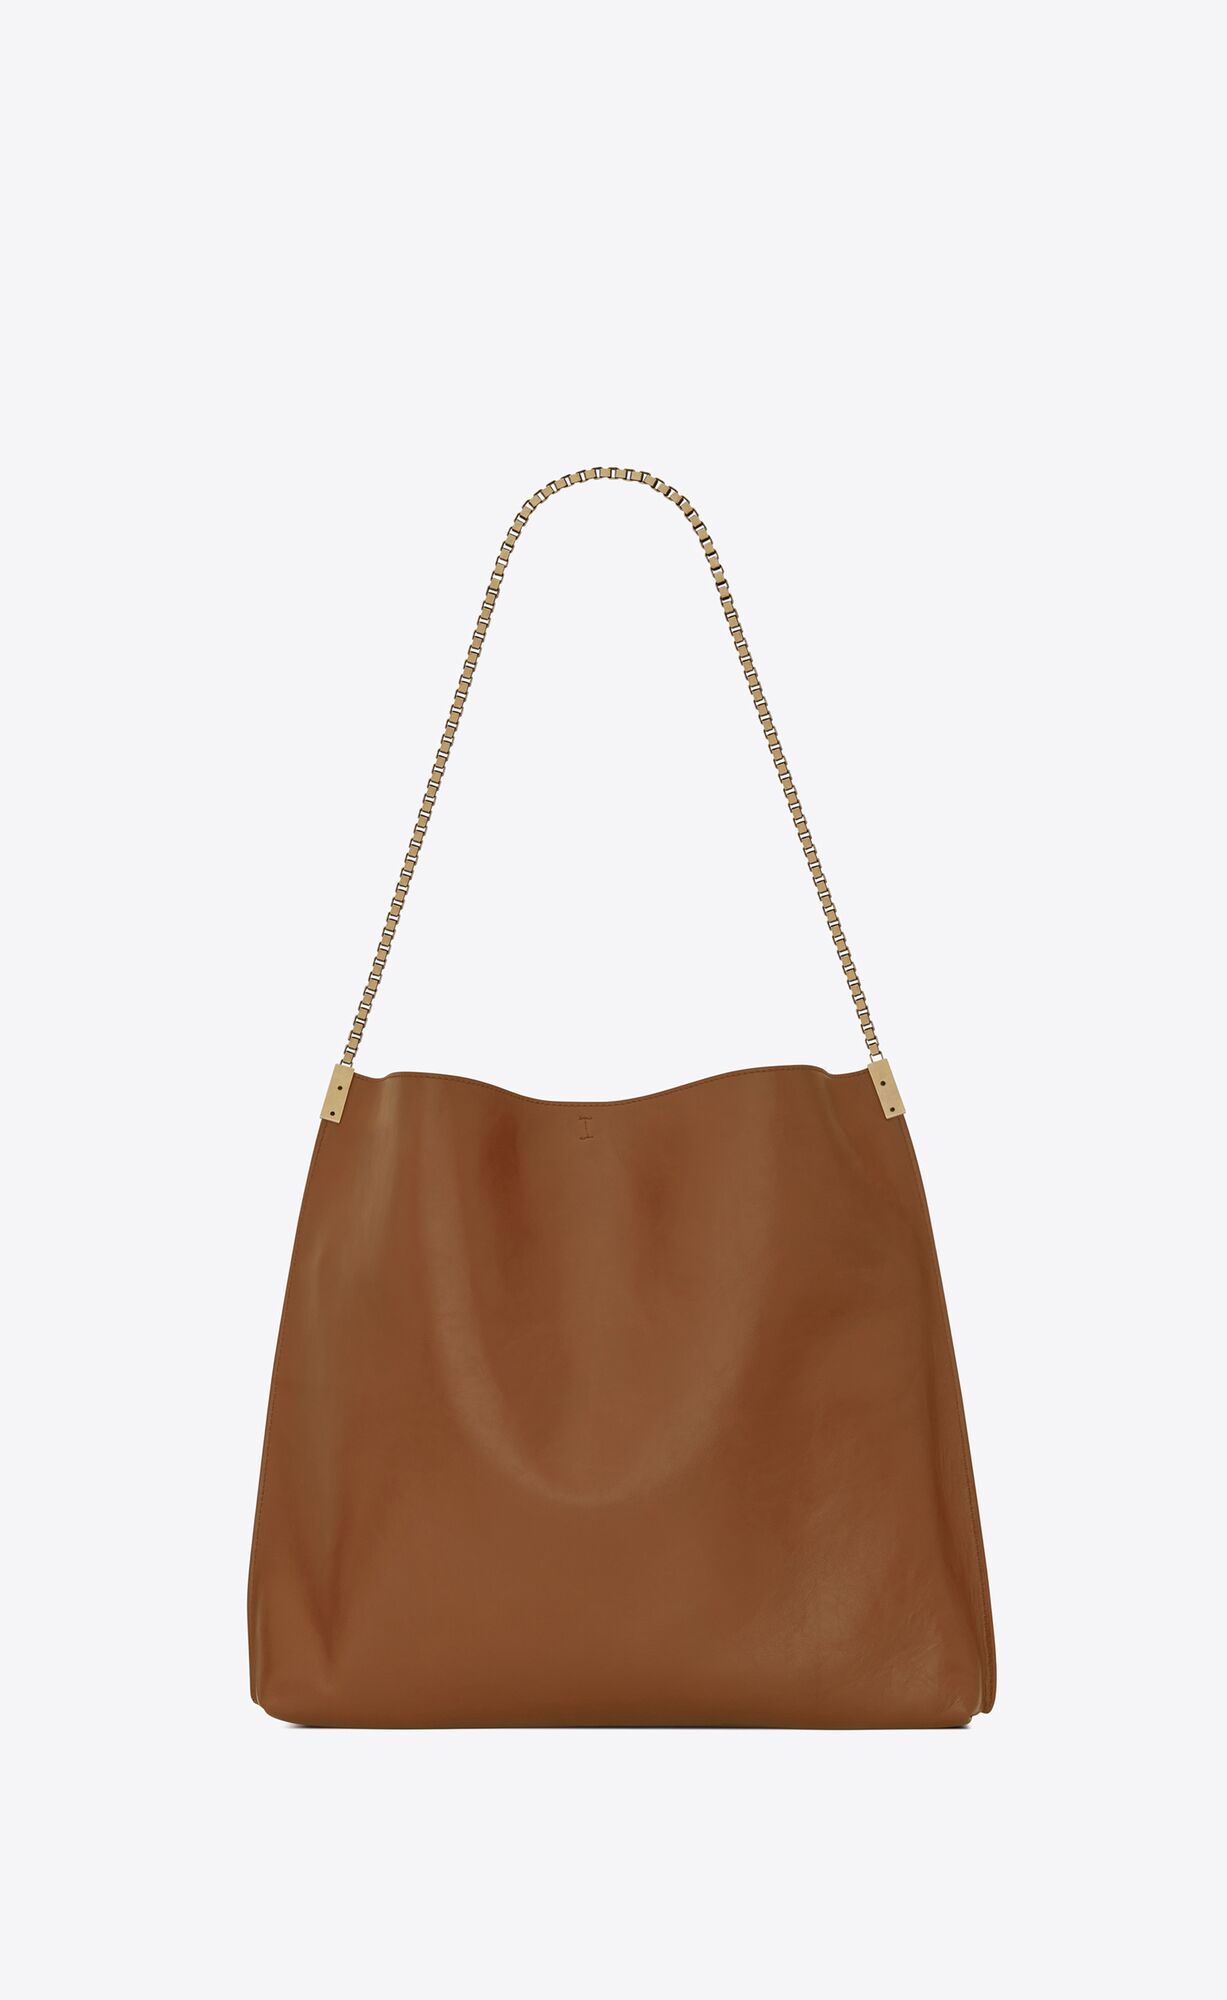 SUZANNE medium hobo bag in smooth leather | Saint Laurent United ...